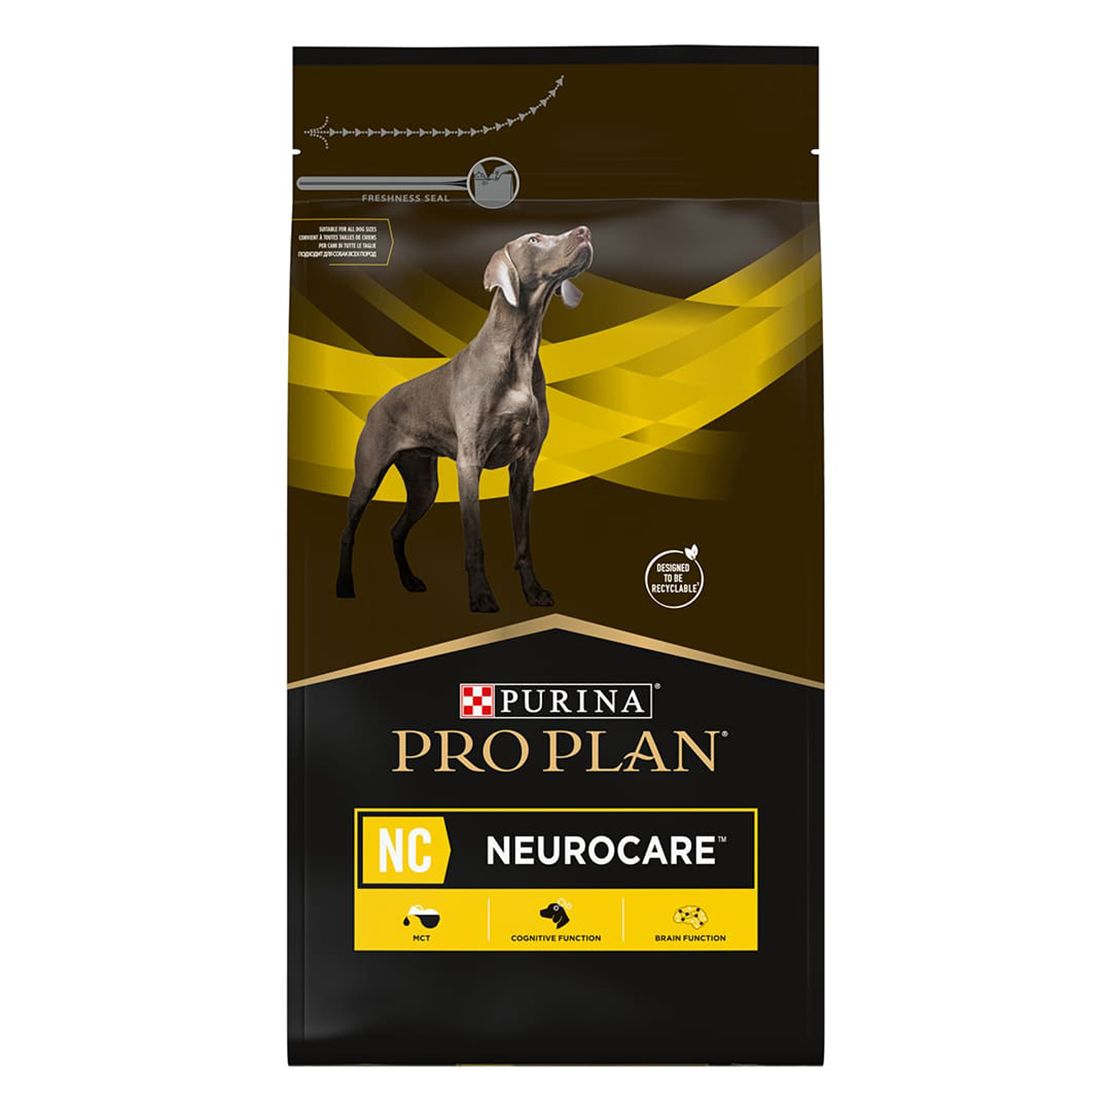 Purina Pro Plan Veterinary Diets Canine – NC NeuroCare 3 kg